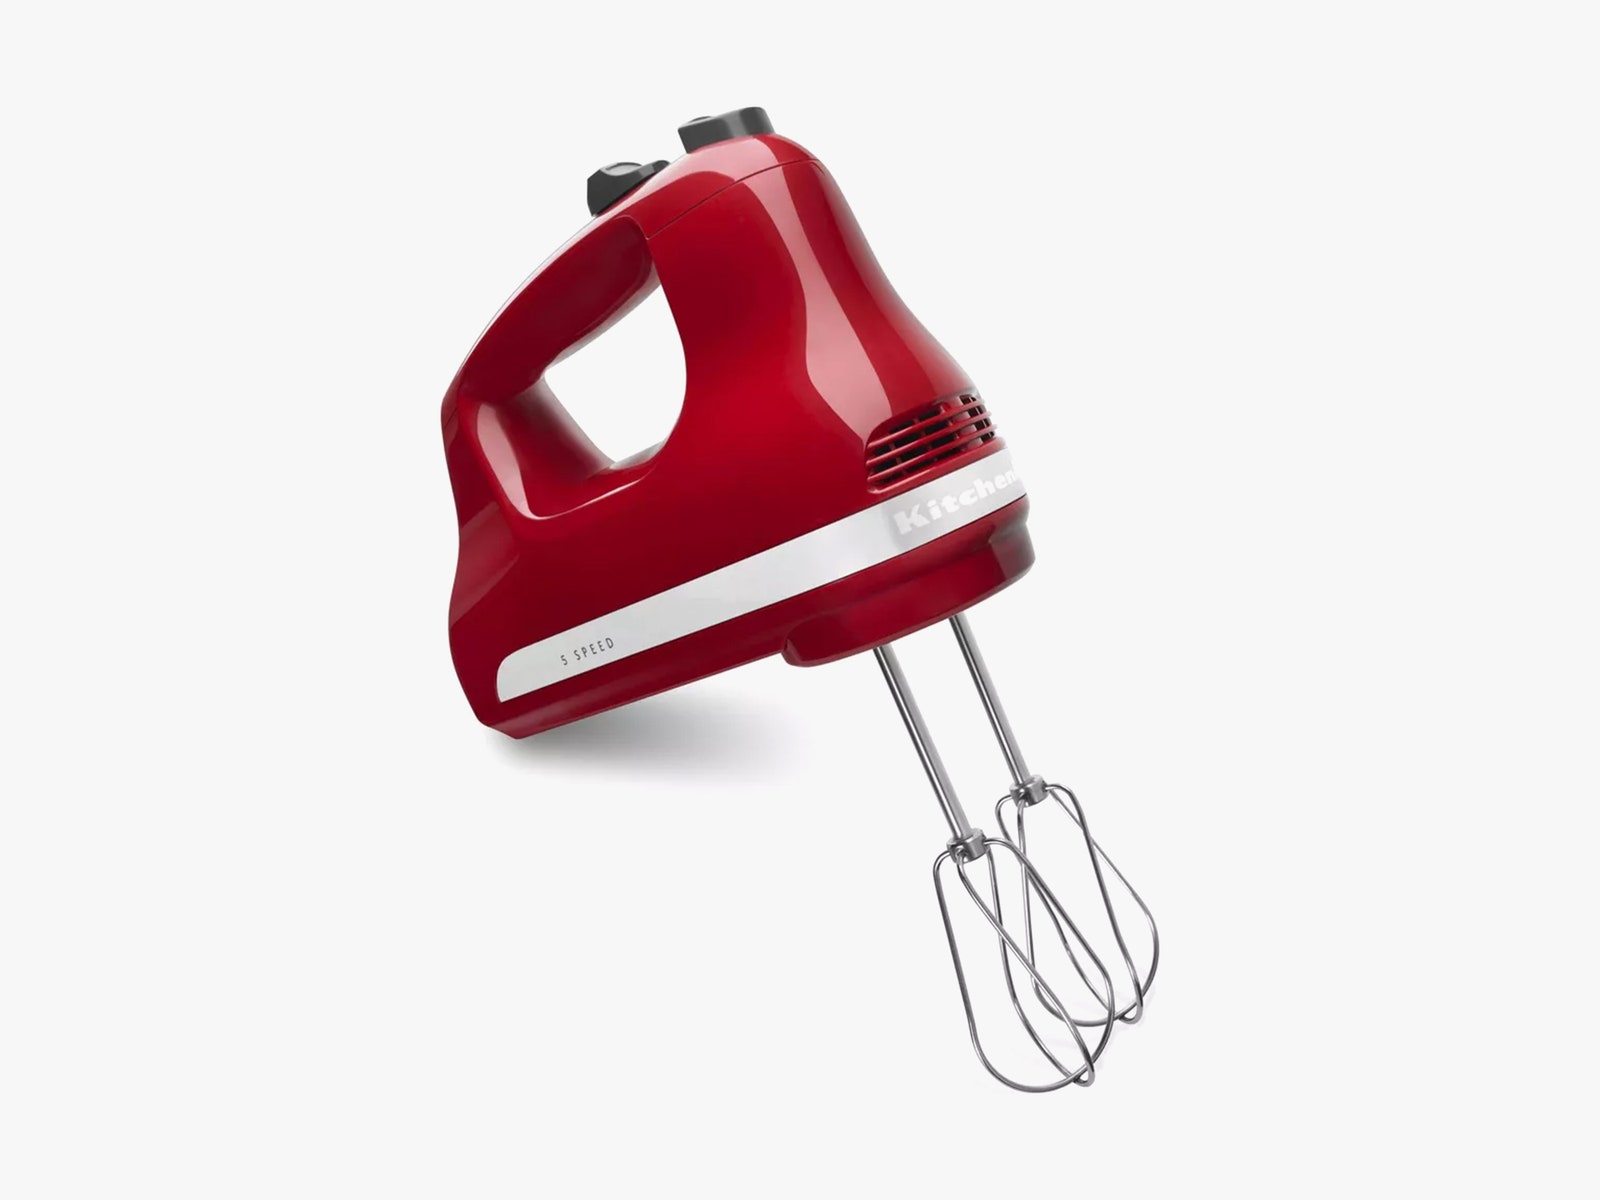 Red handheld appliance with 2 extensions of wire mixers attached